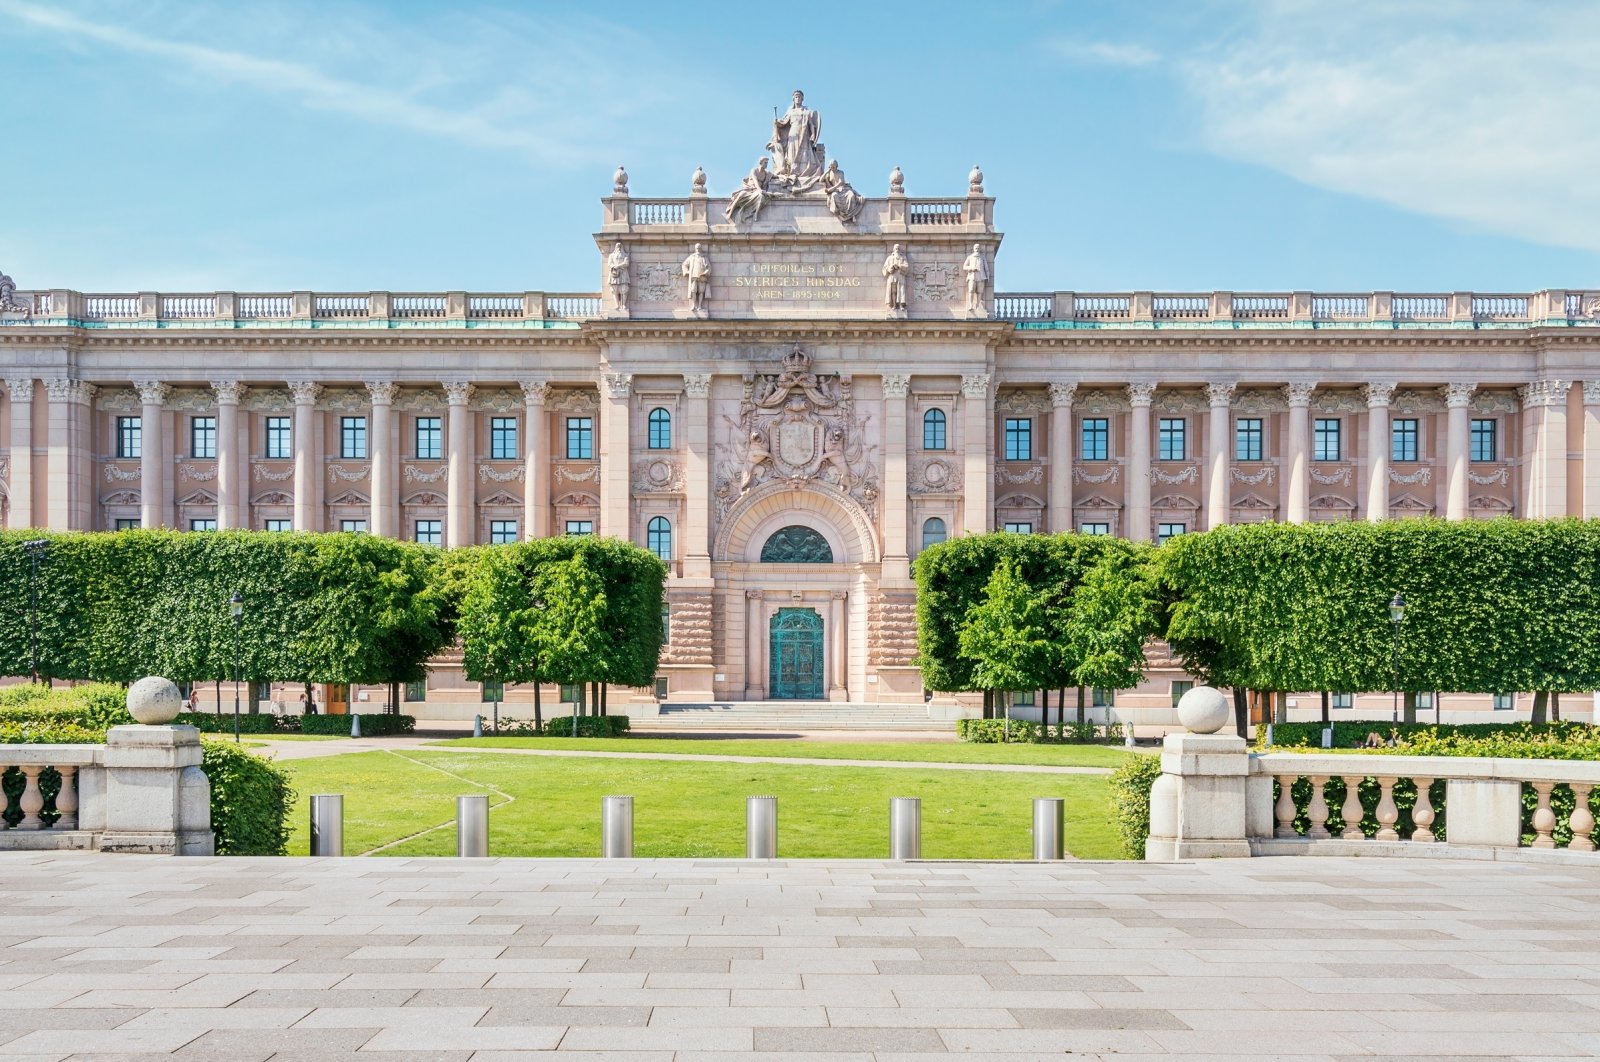 Facade of Riksdagshuset, the Swedish parliament, in Stockholm, Sweden, in this undated file photo. (Shutterstock File Photo)